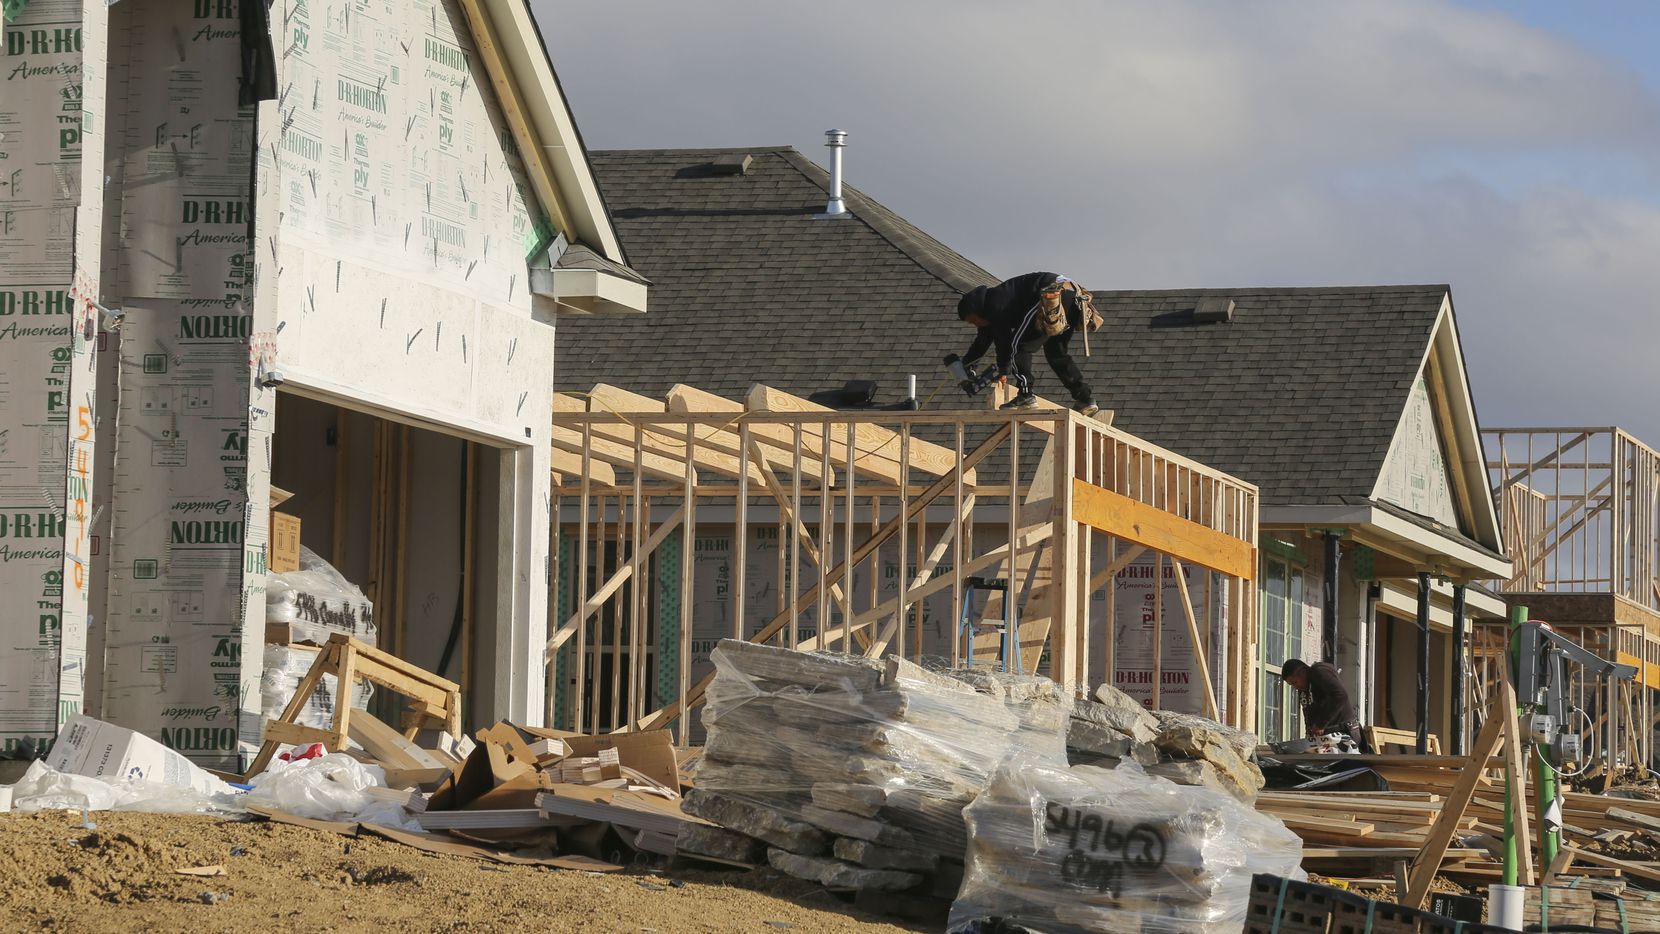 D-FW had the country's top homebuilding market before the COVID-19 pandemic hit.